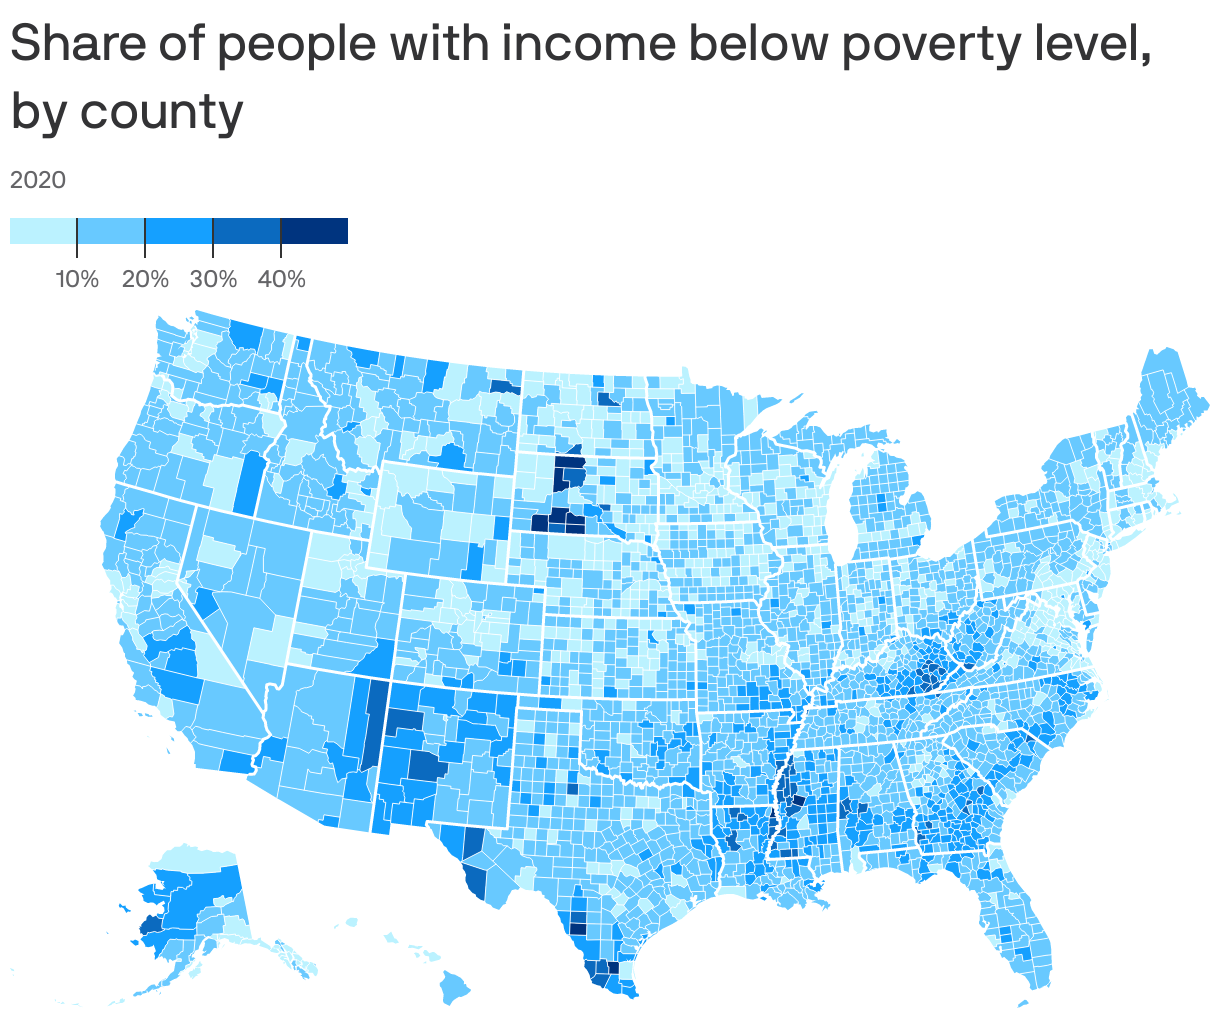 Share of people with income below poverty level, by county